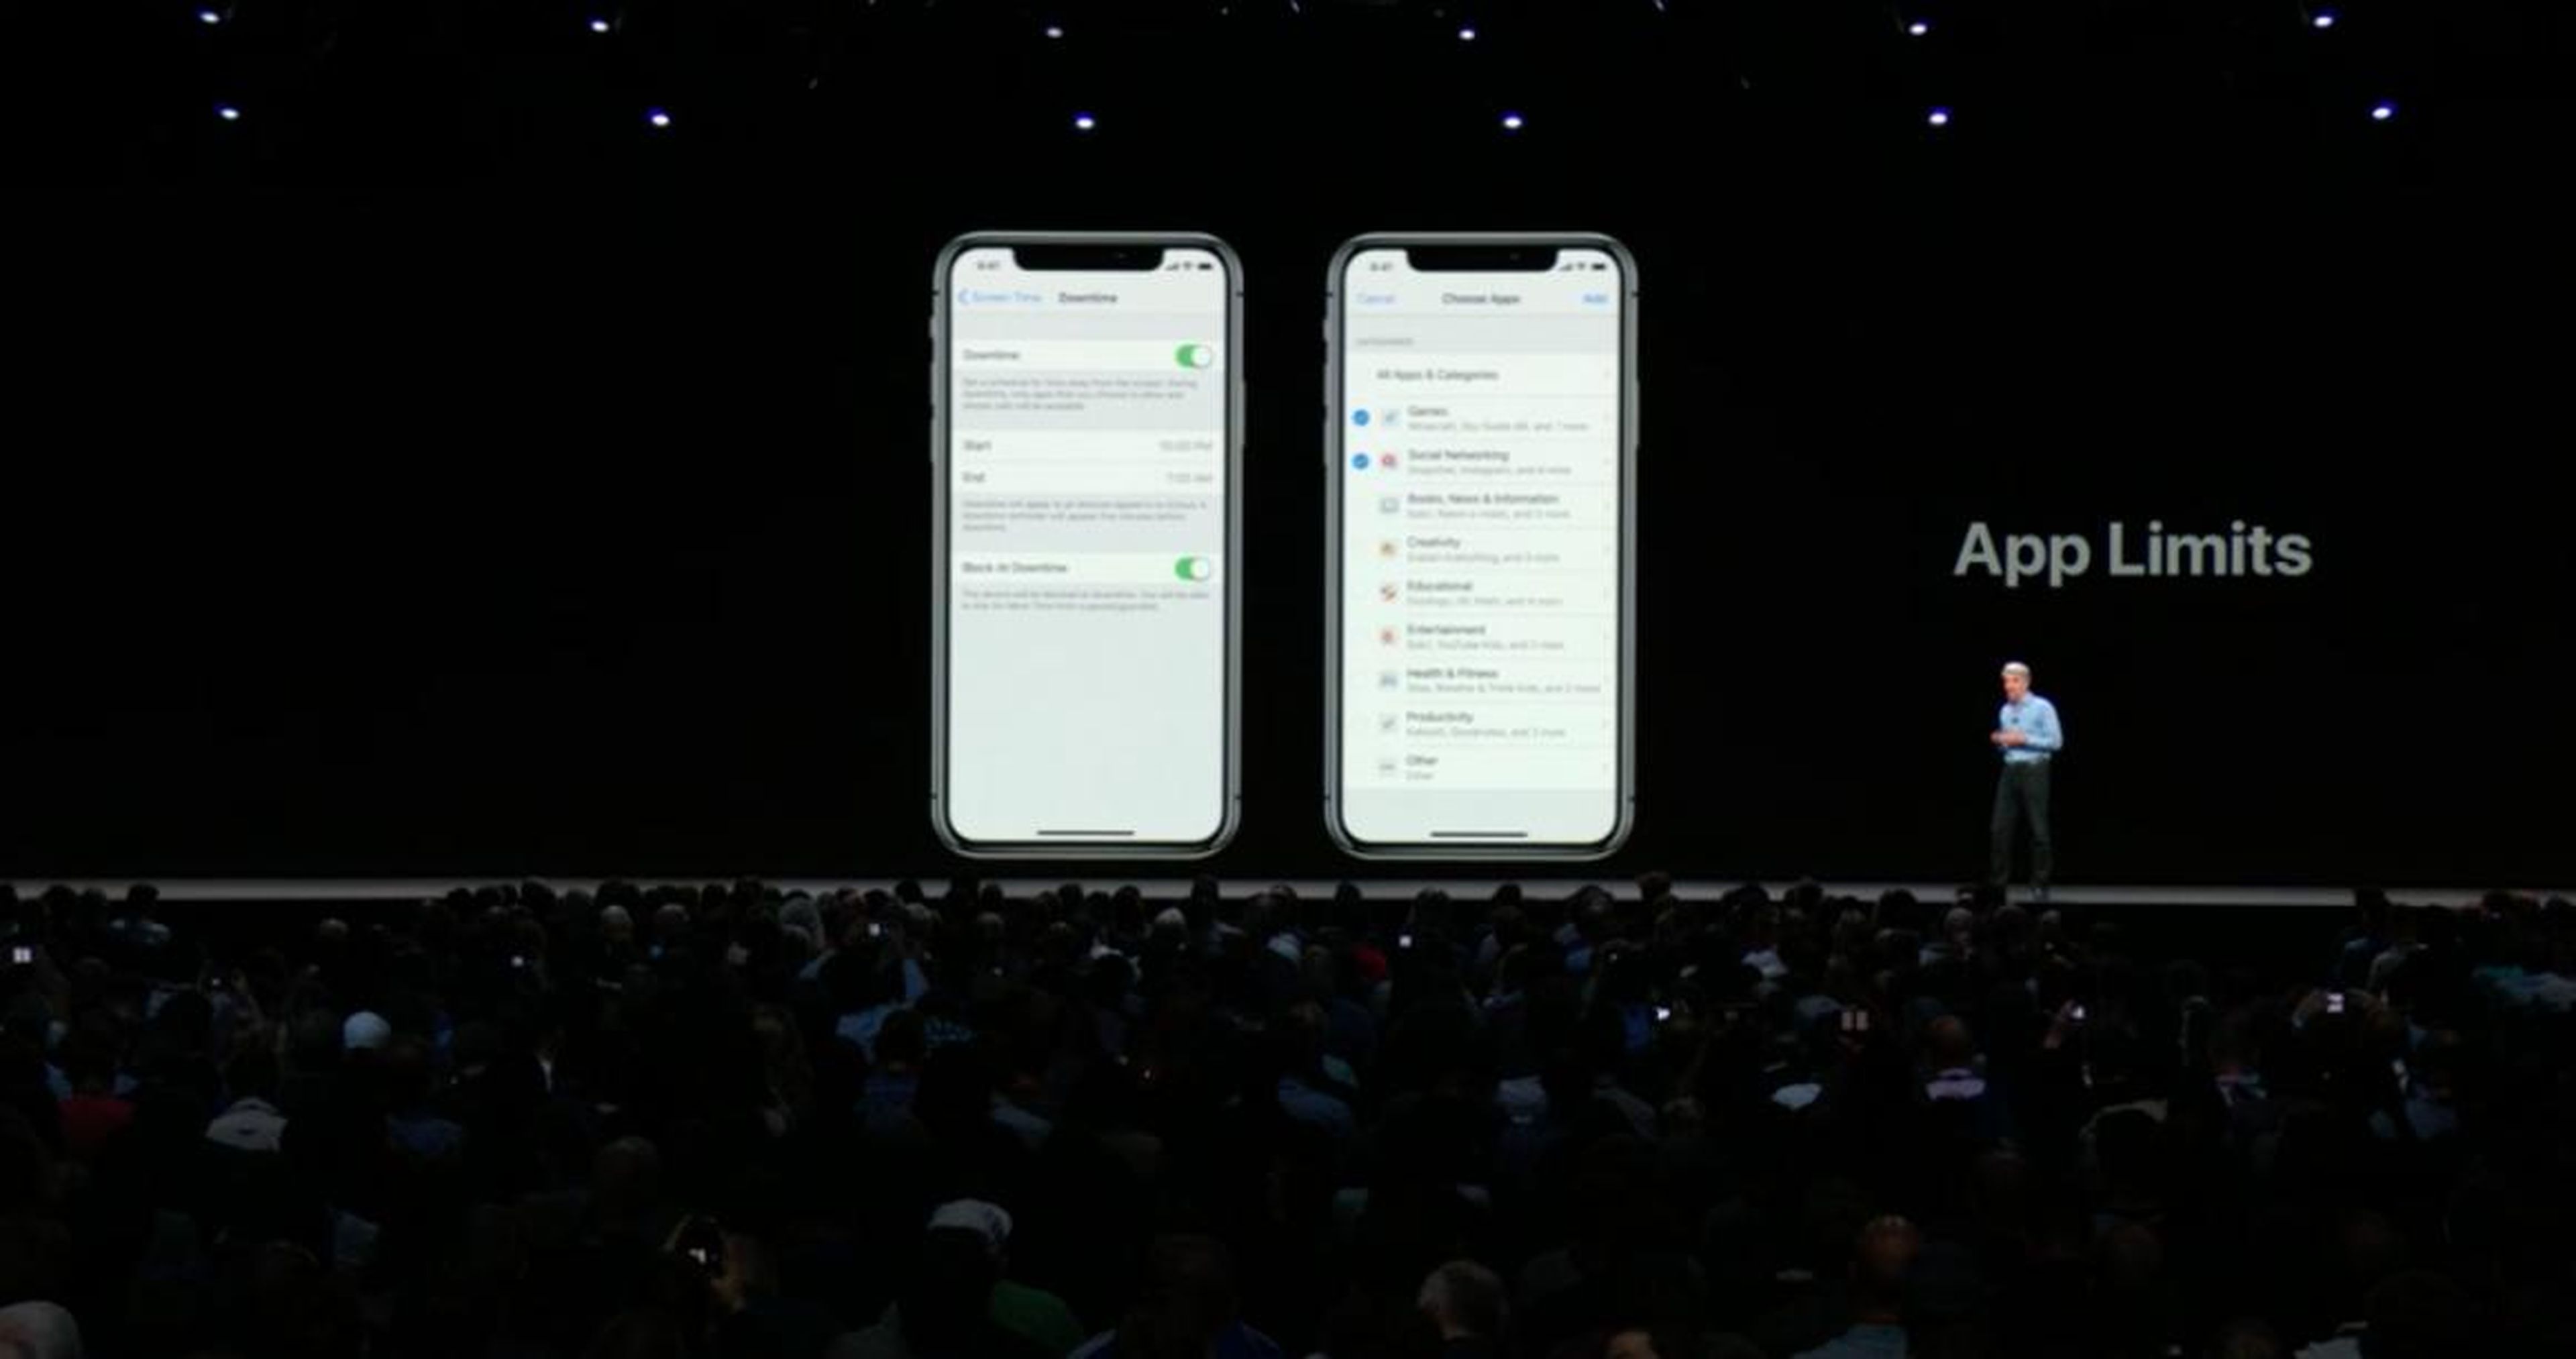 12. iOS 12 will introduce a feature called "App Limits" designed to help you manage your time with certain apps. For instance, if you want to spend only an hour on Instagram per day, you can do that. Parents can also set limits